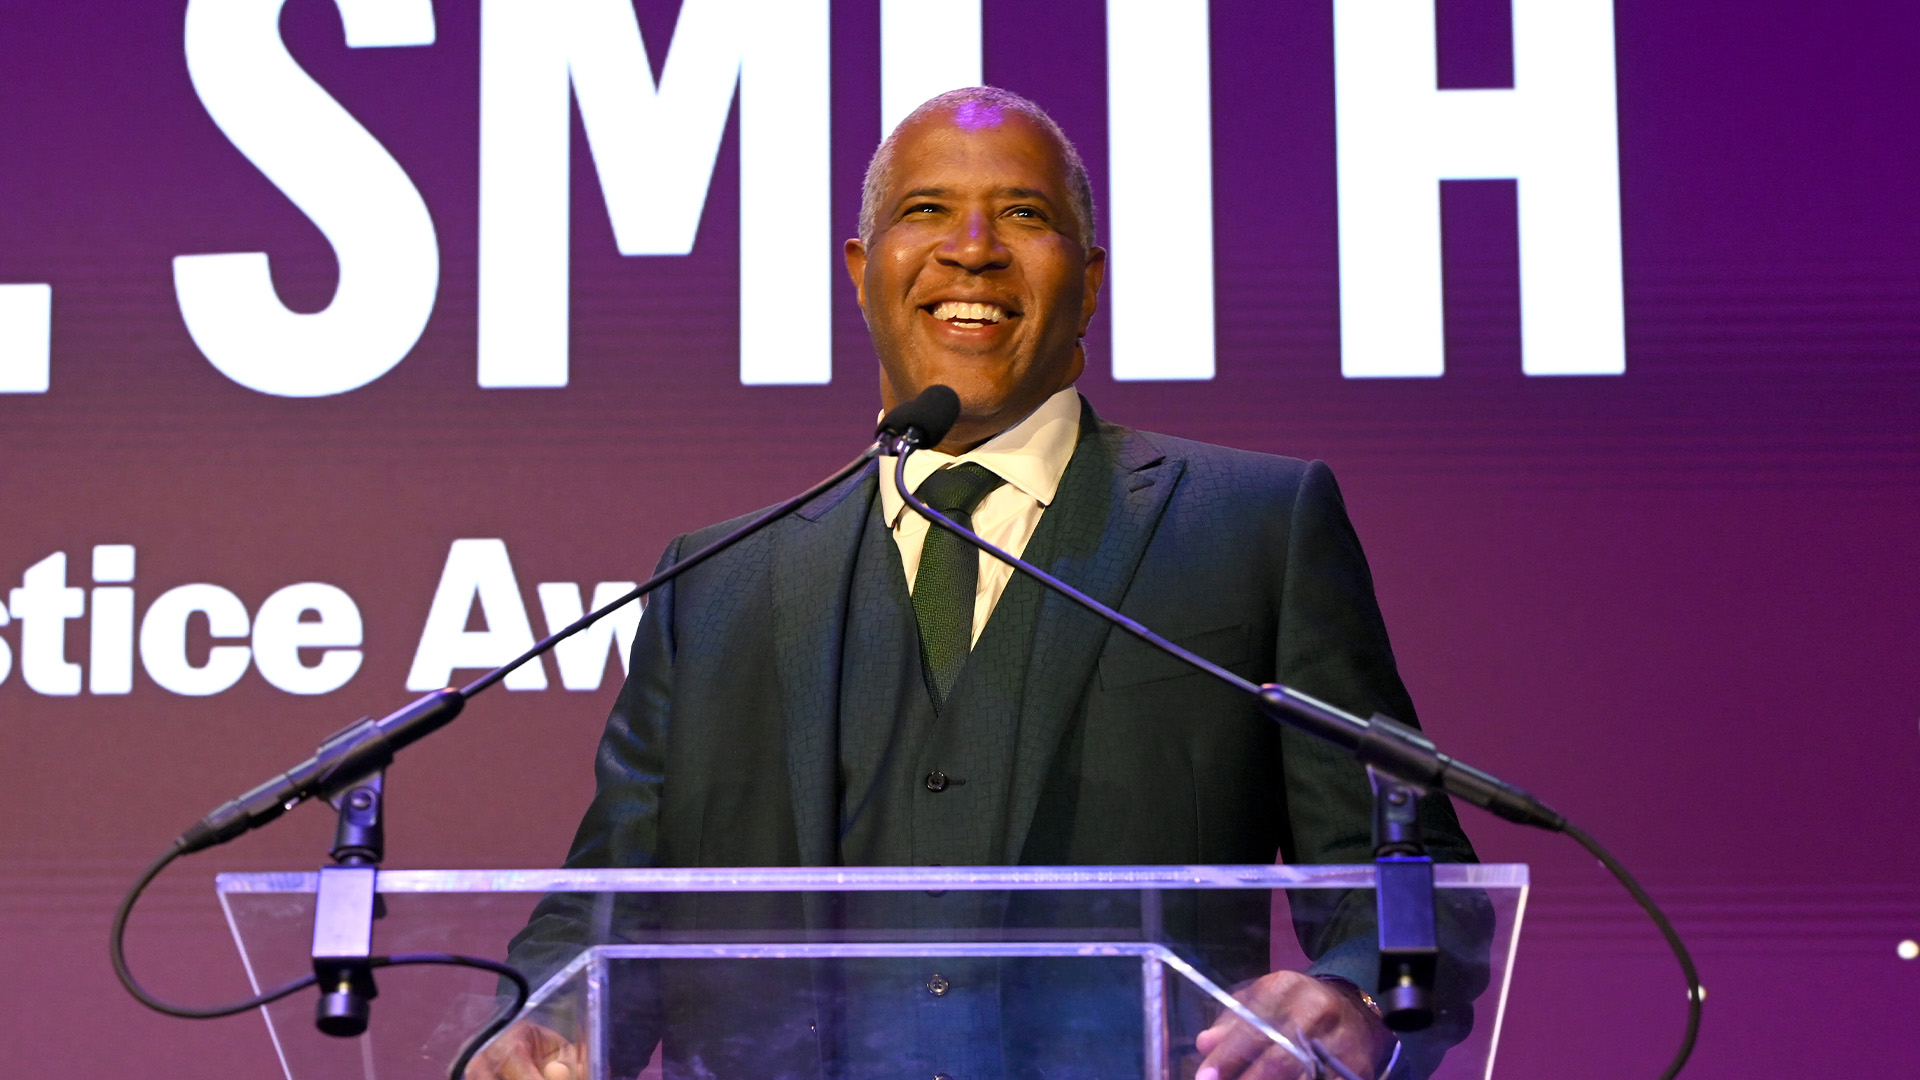 LDF Celebrates 35 Years Of Advancing The Culture Through Achievements By Robert F. Smith, The Jordan Brand, And More